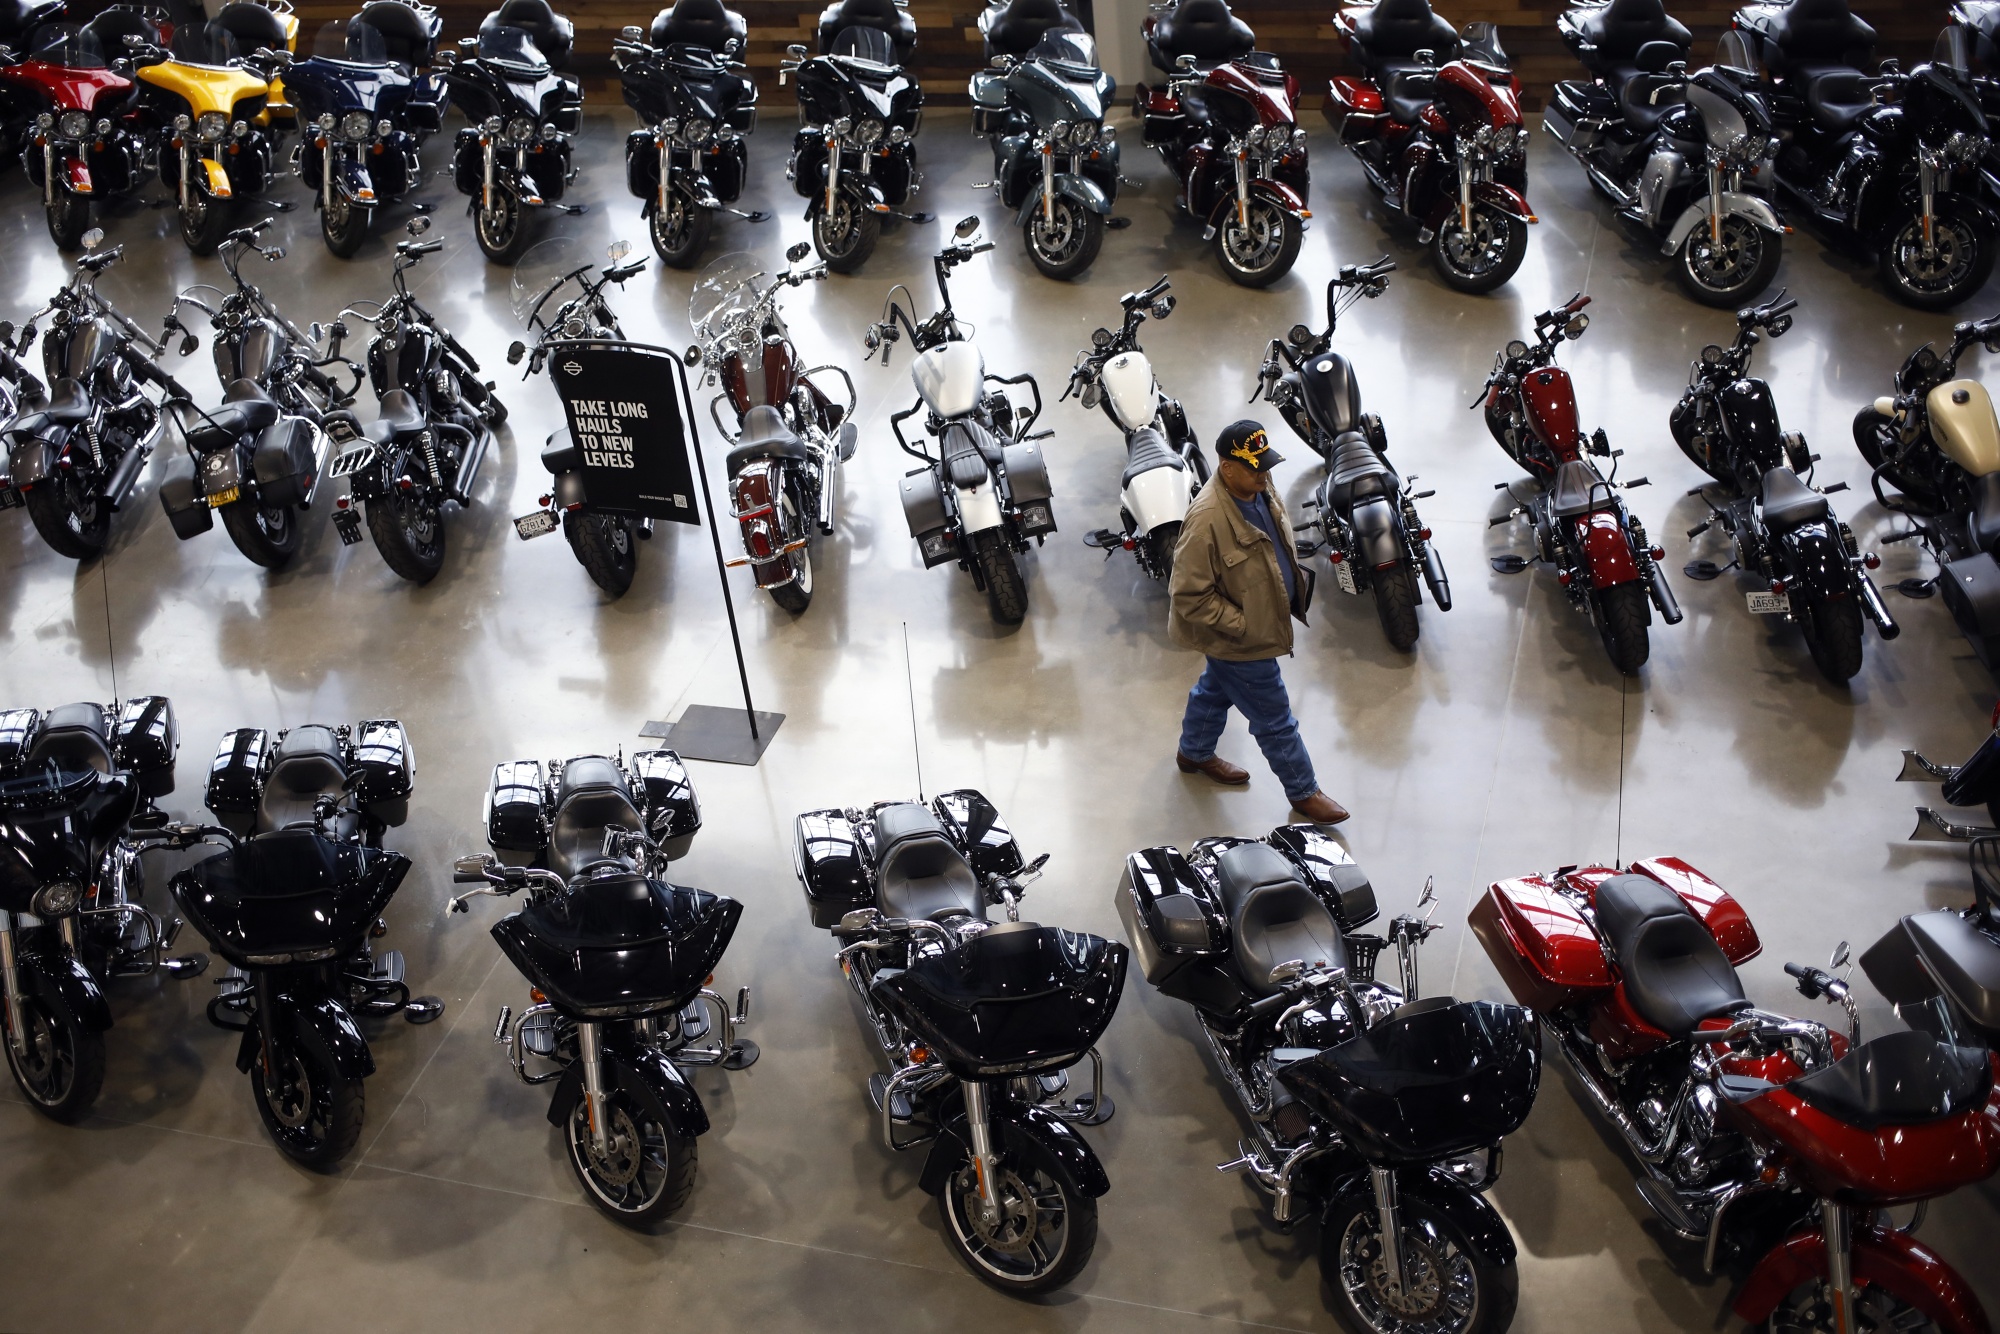 Motorcycles at a Harley-Davidson dealership in Louisville, Kentucky.